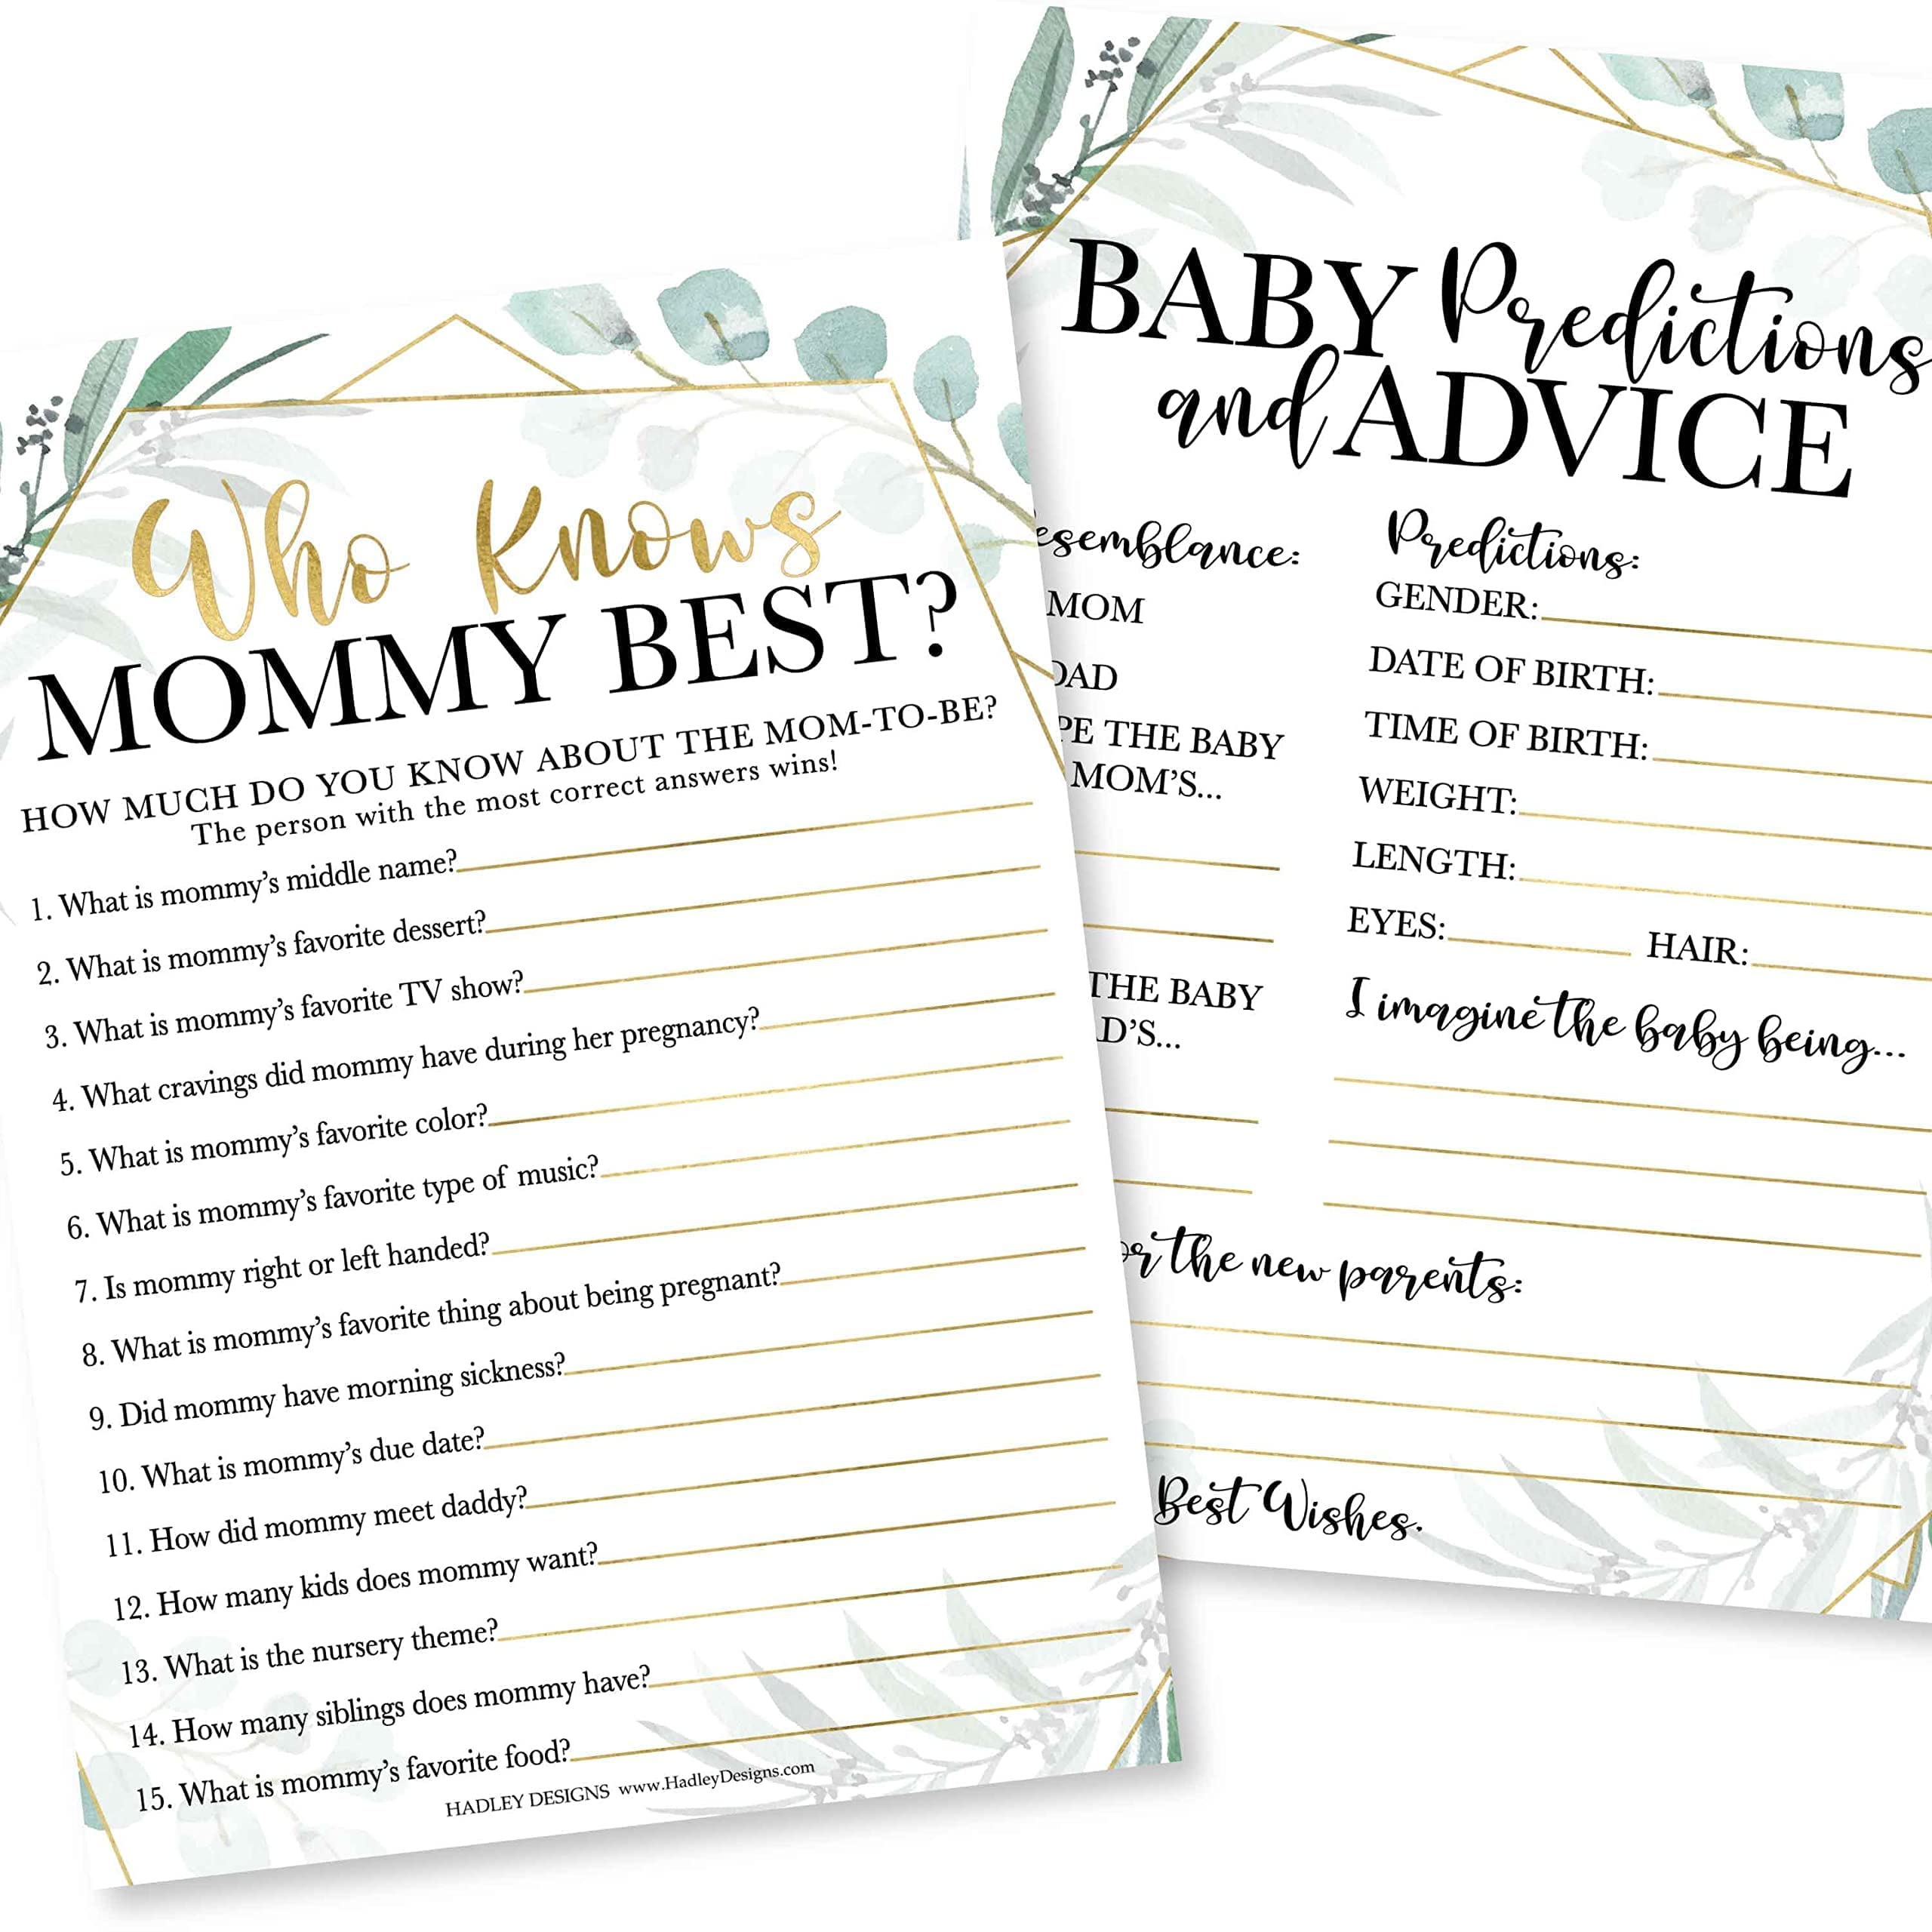 25 Greenery Animal Matching, 25 Nursery Rhyme Game, 25 Who Knows Mommy Best, 25 Baby Prediction And Advice Cards - 4 Double Sided Cards, Baby Shower Party Supplies